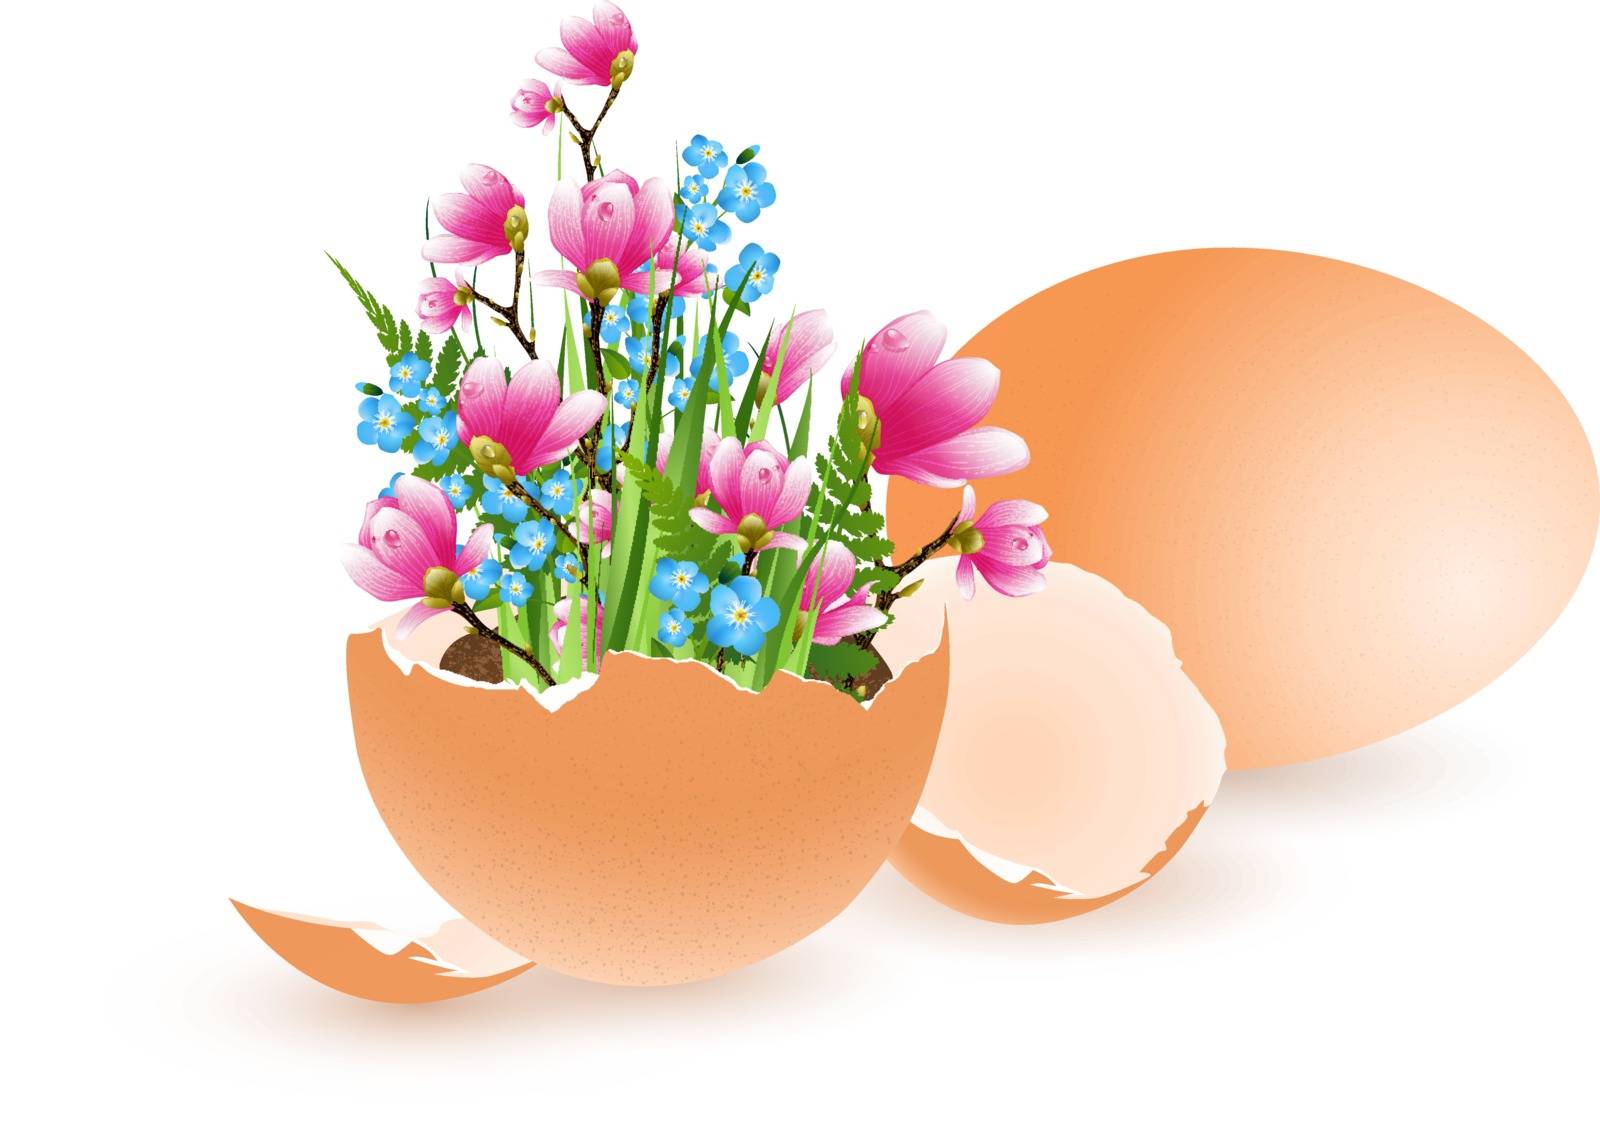 Illustration of Easter Eggs Decorated With Fern and Flowers Over White